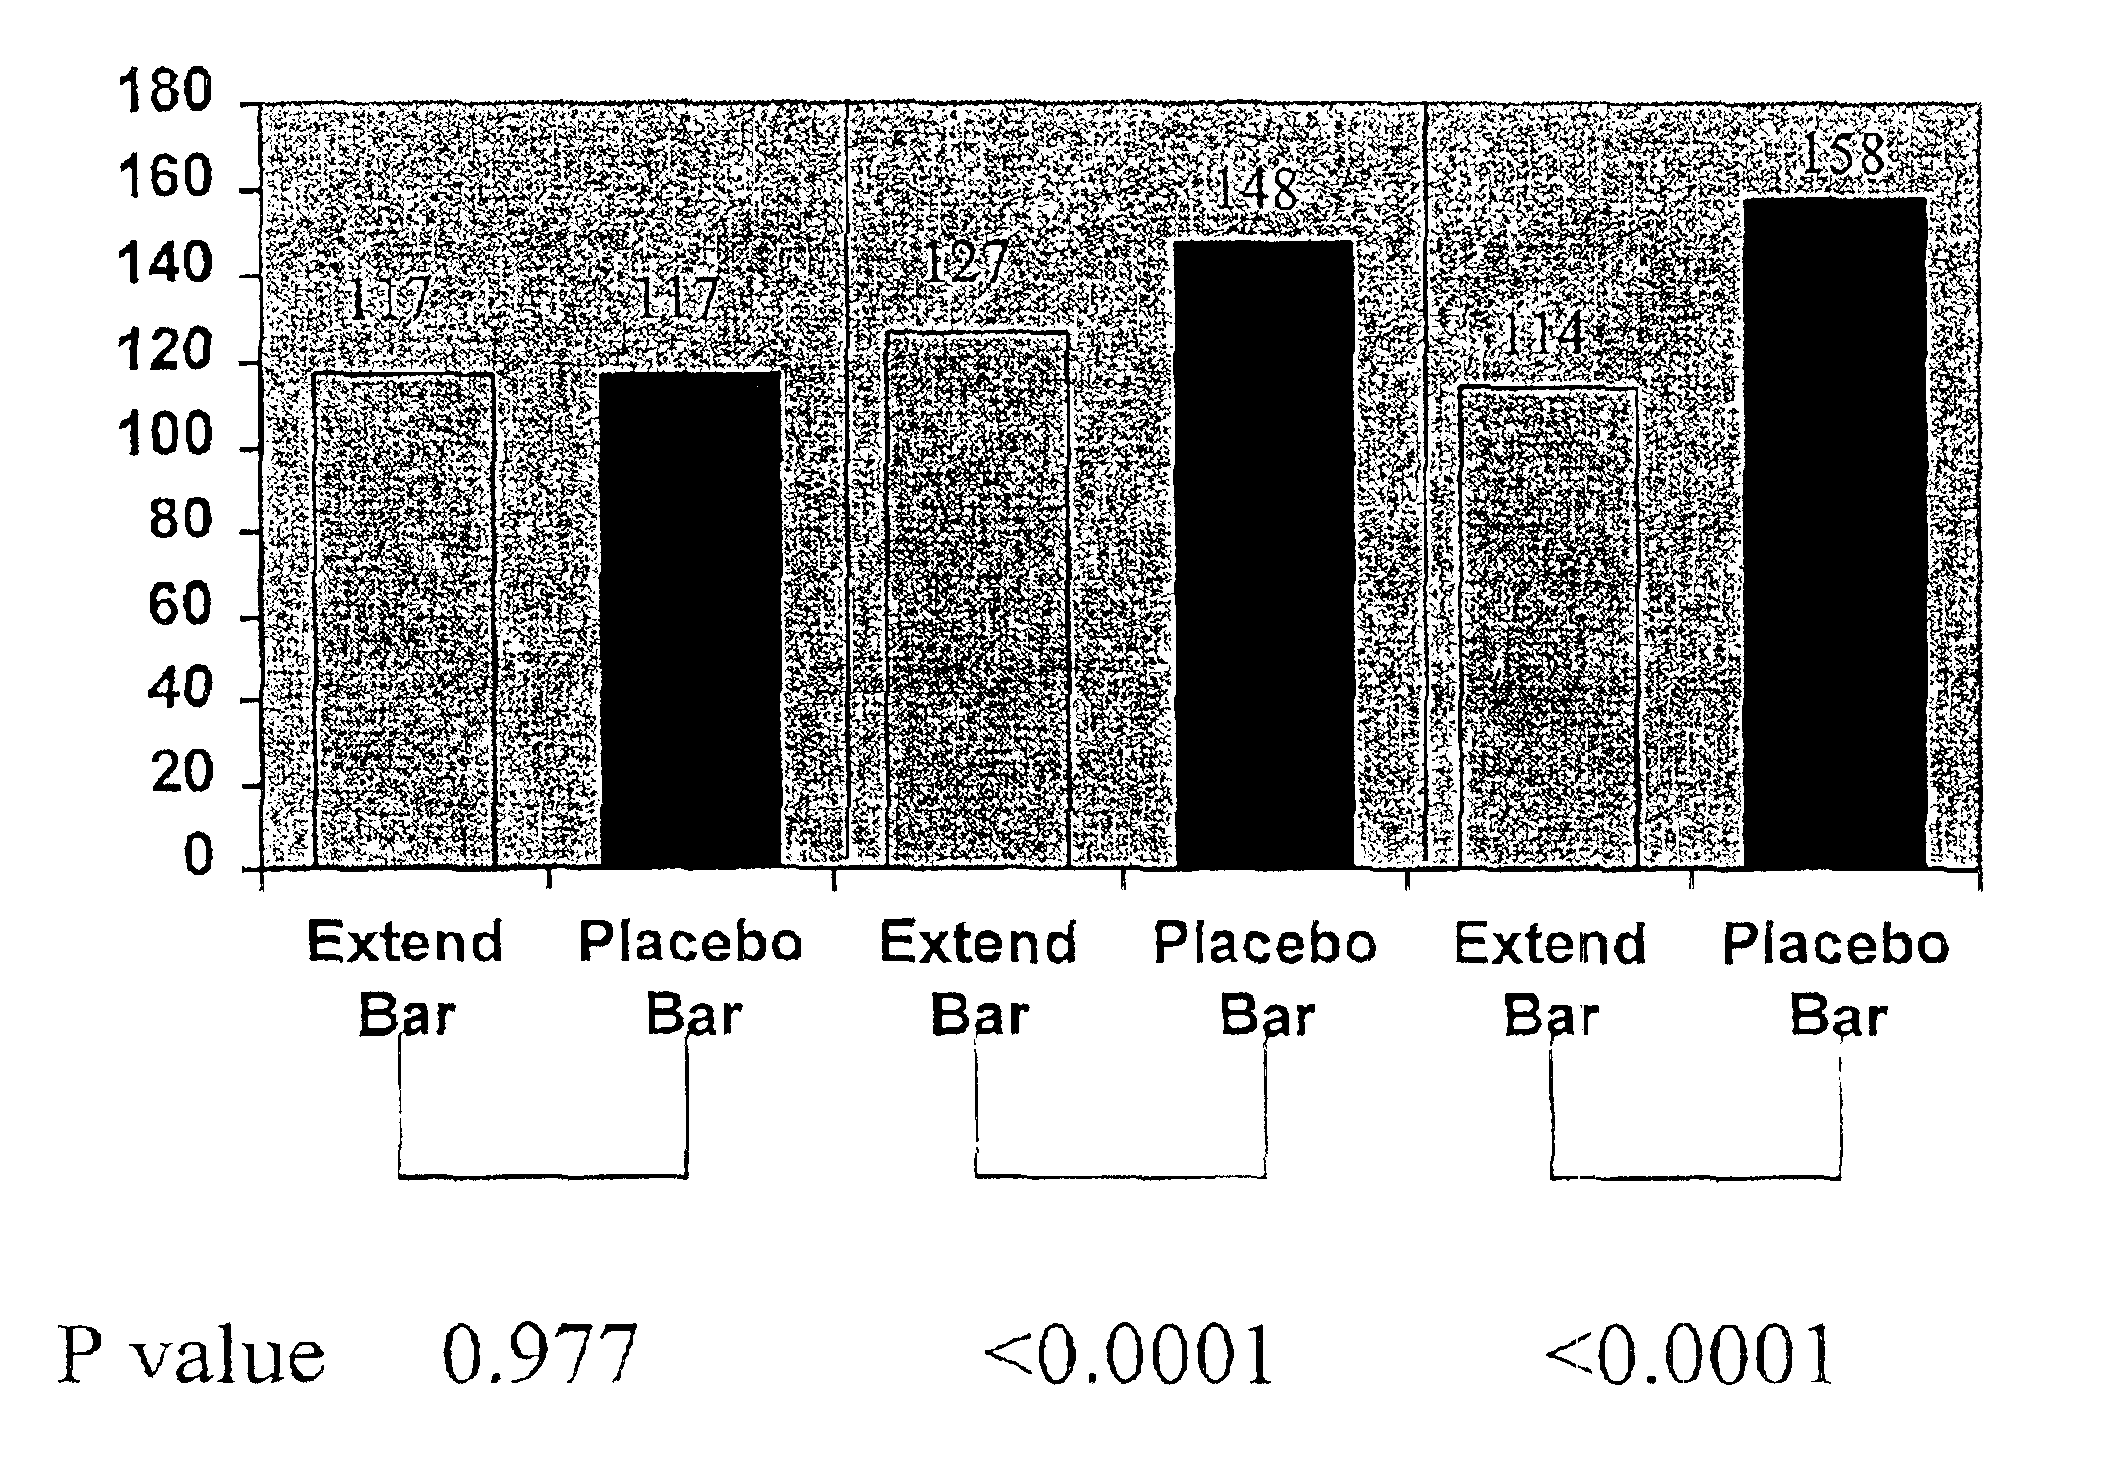 Methods for regulating blood glucose and appetite suppression in type 2 diabetics